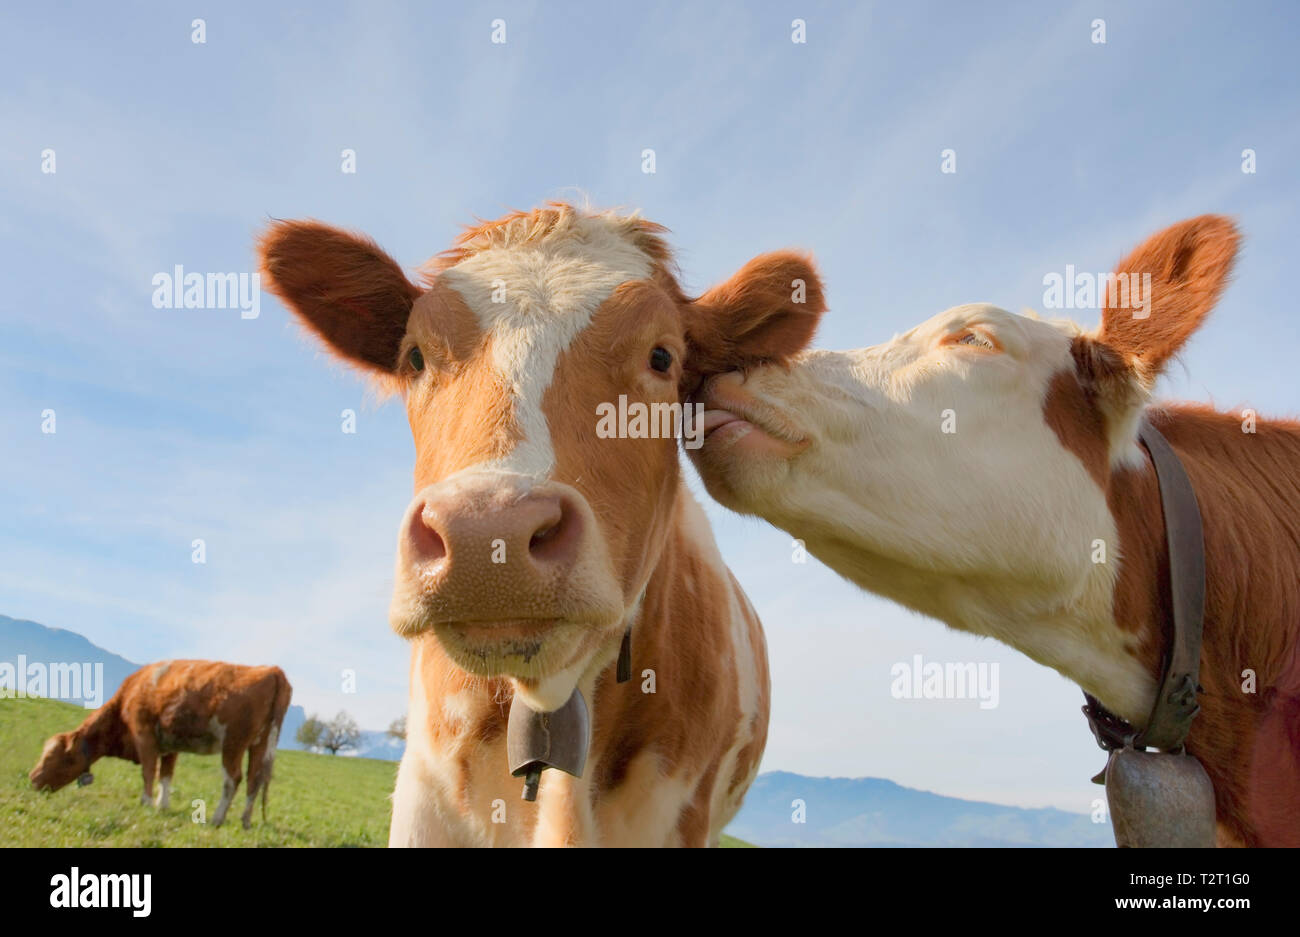 A cow giving affection to another Stock Photo